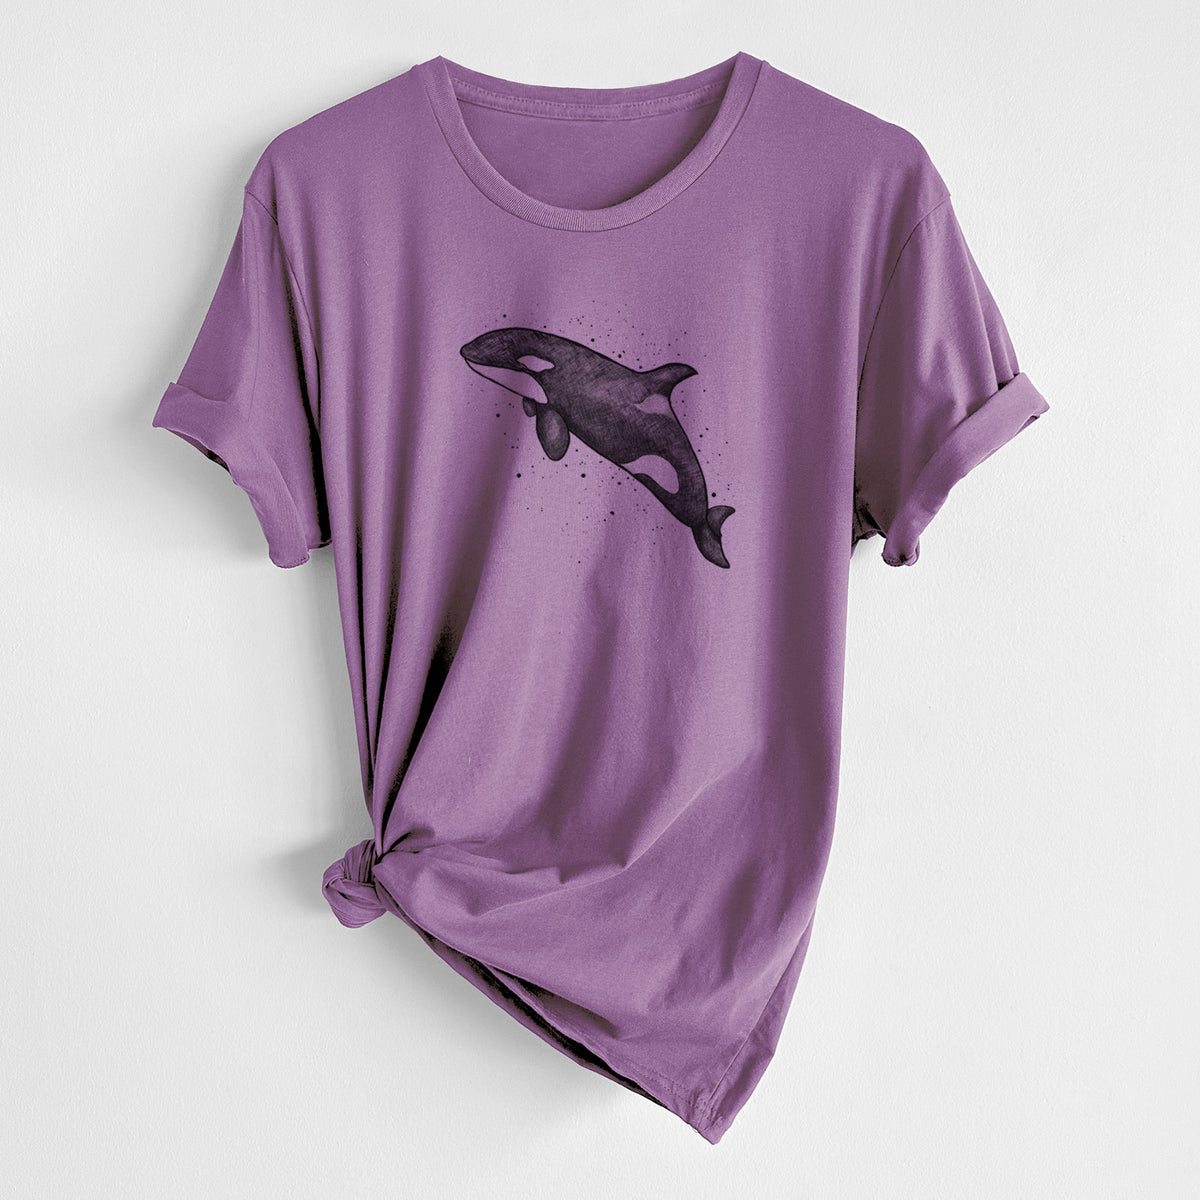 Orca Whale - Unisex Crewneck - Made in USA - 100% Organic Cotton